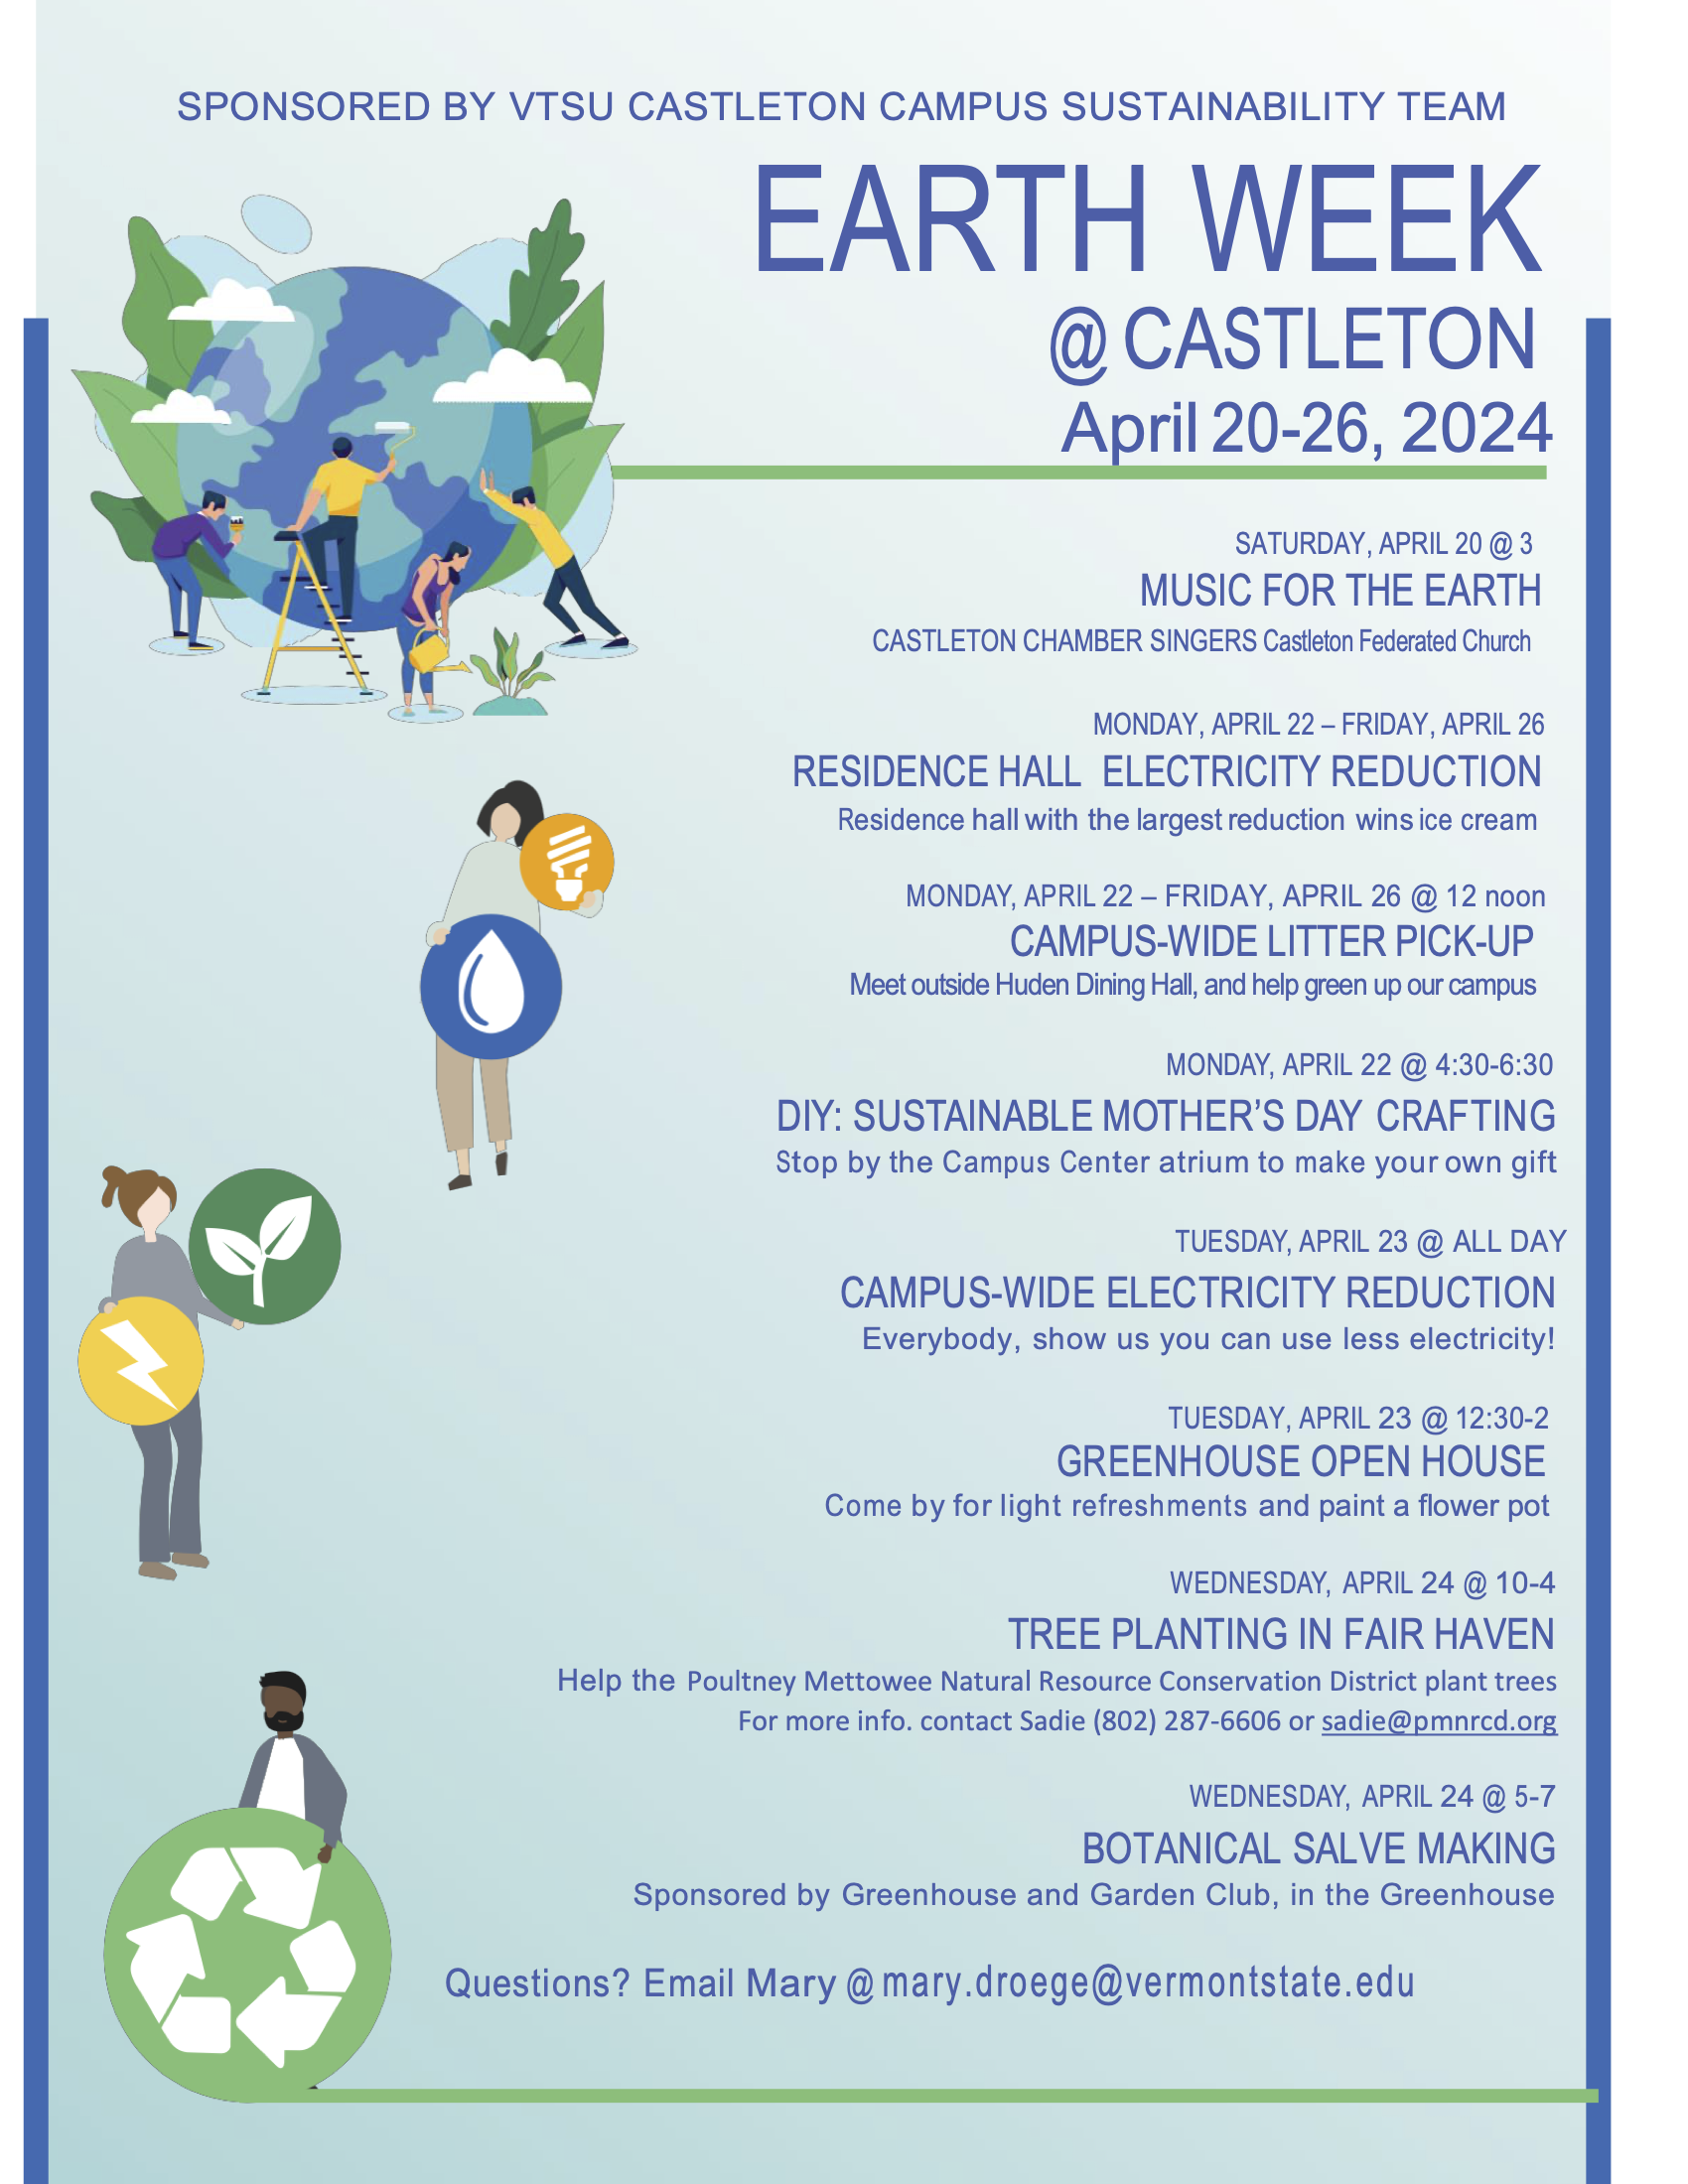 EARTH WEEK
@CASTLETON April 20-26, 2024
SATURDAY, APRIL 20 @ 3
MUSIC FOR THE EARTH CASTLETON CHAMBER SINGERS Castleton Federated Church
MONDAY, APRIL 22 – FRIDAY, APRIL 26
RESIDENCEHALL ELECTRICITYREDUCTION Residence hall with the largest reduction wins ice cream
MONDAY, APRIL 22 – FRIDAY, APRIL 26 @ 12 noon
CAMPUS-WIDE LITTER PICK-UP Meet outside Huden Dining Hall, and help green up our campus
MONDAY, APRIL 22 @ 4:30-6:30
DIY: SUSTAINABLE MOTHER’S DAY CRAFTING Stop by the Campus Center atrium to make your own gift
TUESDAY, APRIL 23 @ ALL DAY
CAMPUS-WIDE ELECTRICITY REDUCTION Everybody, show us you can use less electricity!
TUESDAY, APRIL 23 @ 12:30-2
GREENHOUSE OPEN HOUSE Come by for light refreshments and paint a flower pot
WEDNESDAY, APRIL 24 @ 10-4
TREE PLANTING IN FAIR HAVEN Help the Poultney Mettowee Natural Resource Conservation District plant trees For more info. contact Sadie (802) 287-6606 or sadie@pmnrcd.org
WEDNESDAY, APRIL 24 @ 5-7
BOTANICAL SALVE MAKING Sponsored by Greenhouse and Garden Club, in the Greenhouse
Questions? Email Mary @mary.droege@vermontstate.edu